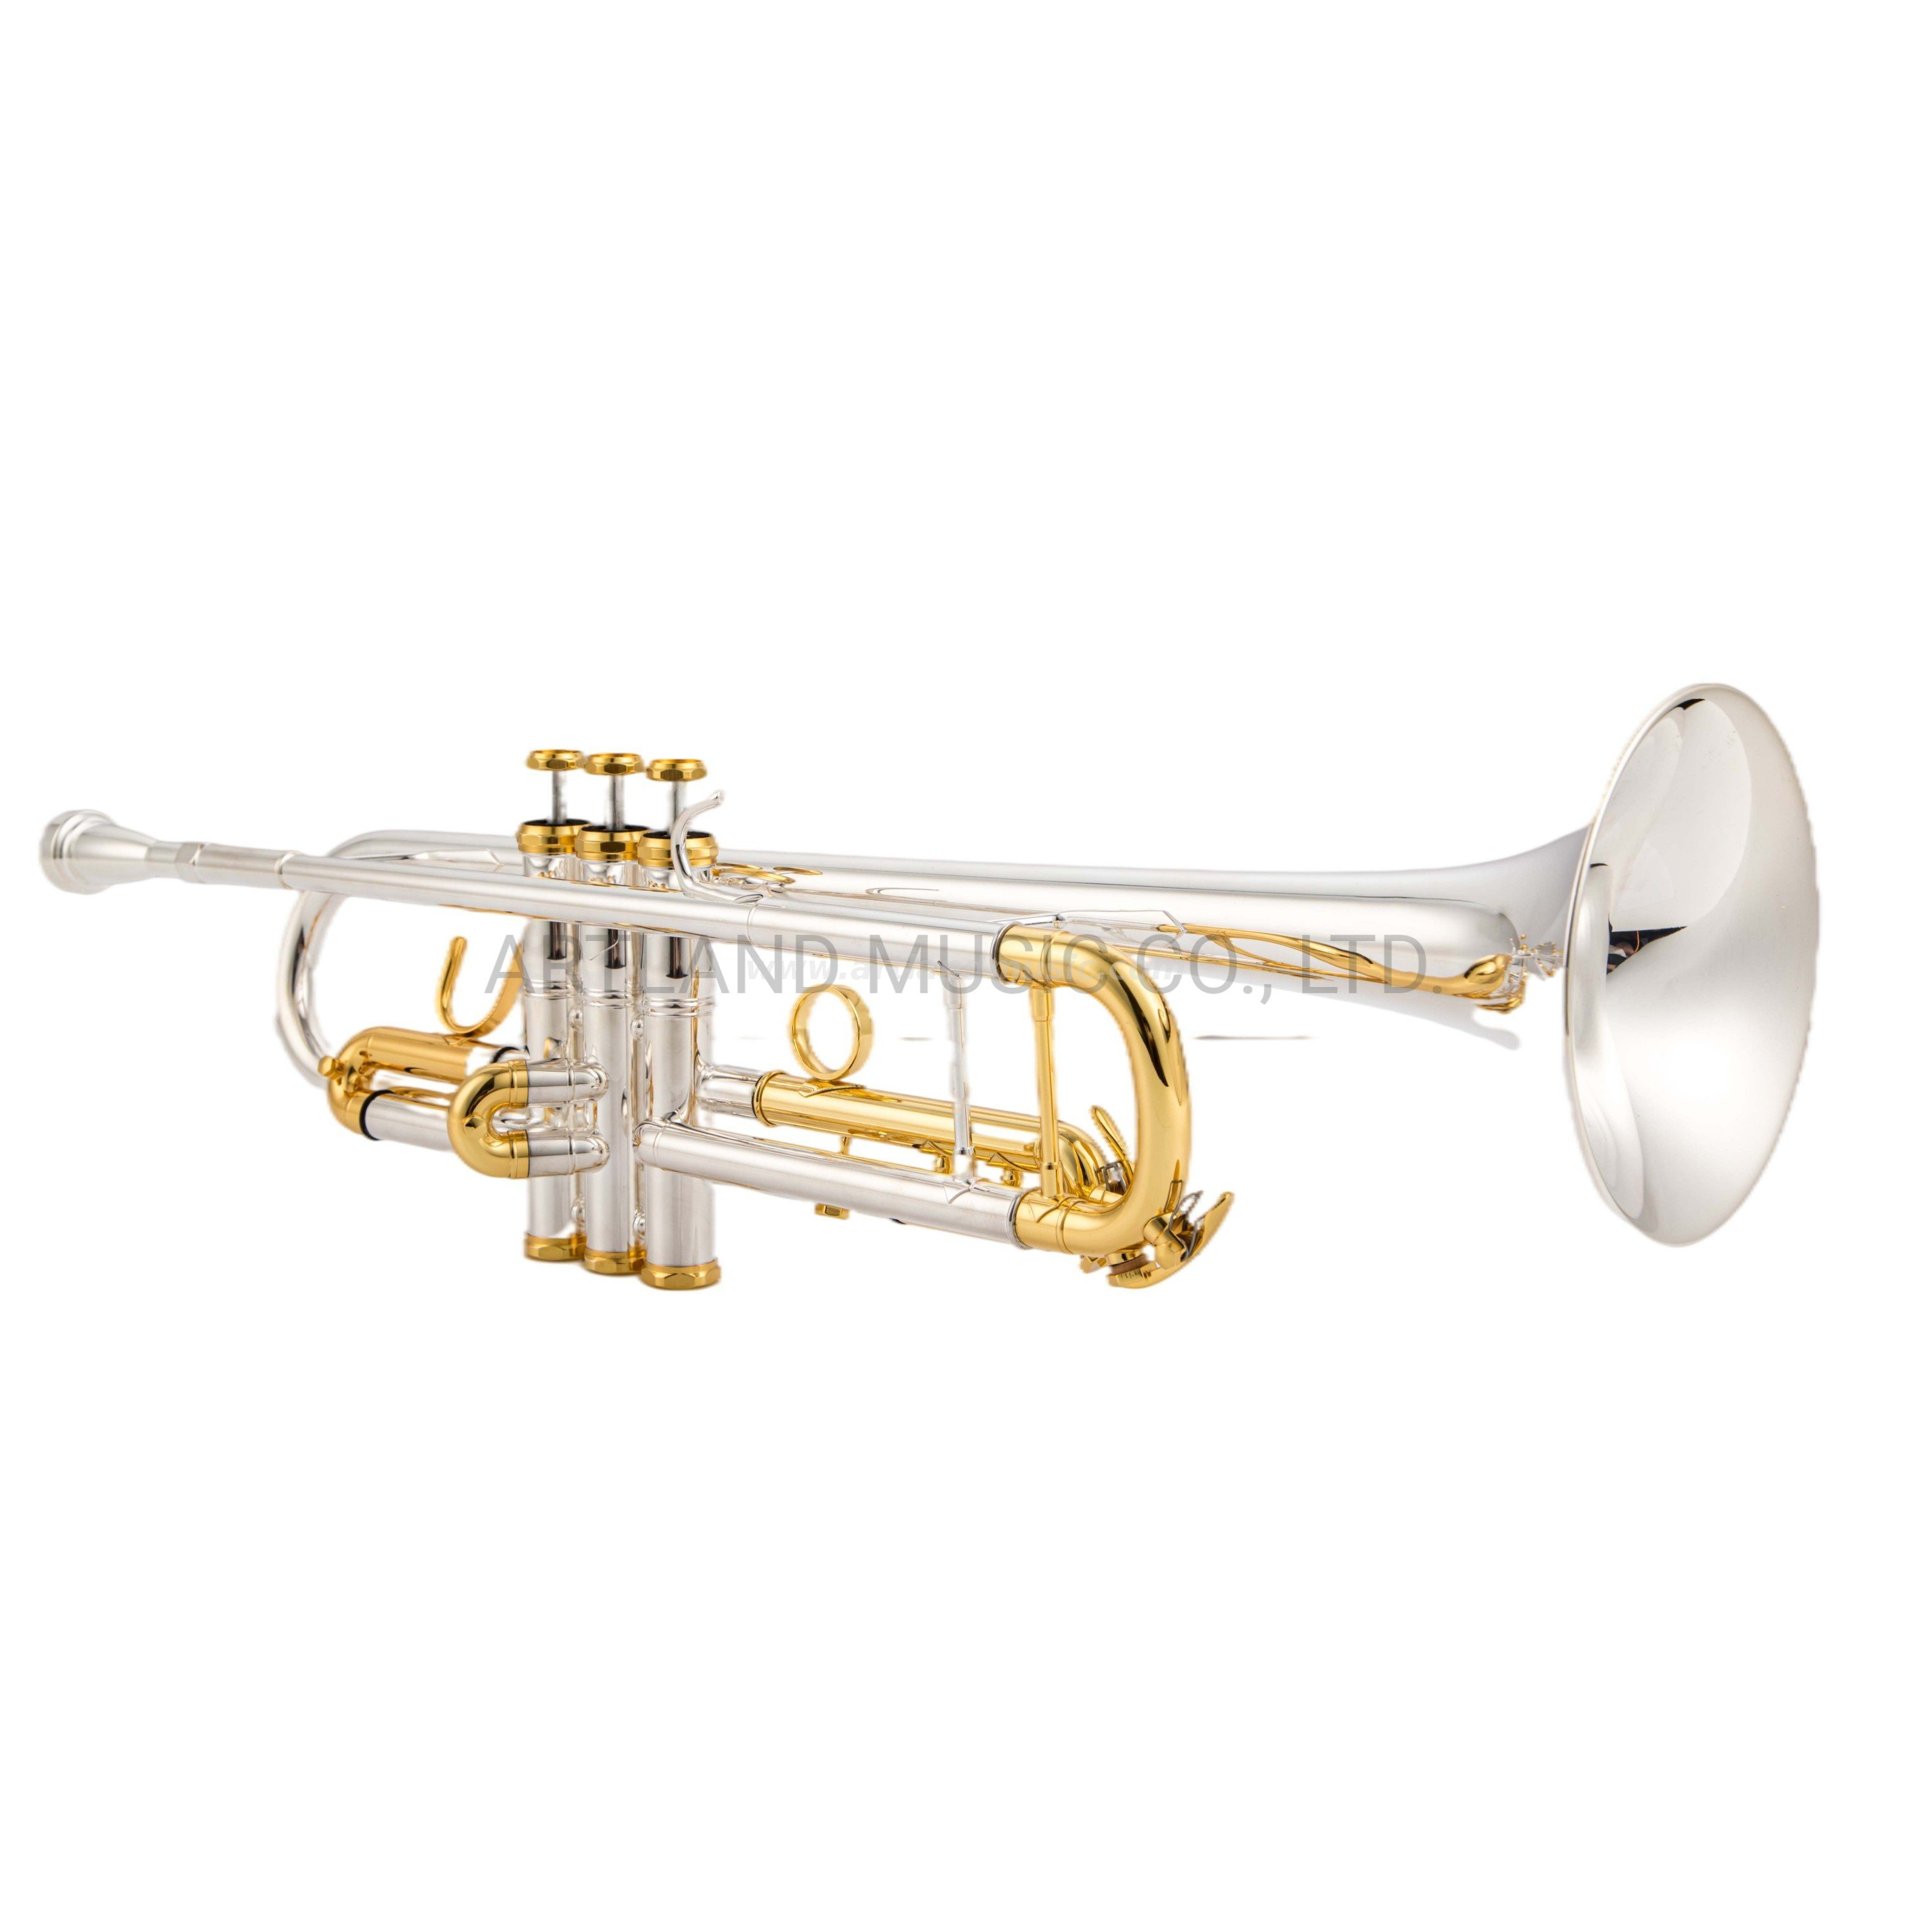 Bach Style Trumpet Silver with Gold plated Cap, One 3c And 5c Mouthpiece (ATR0275S)